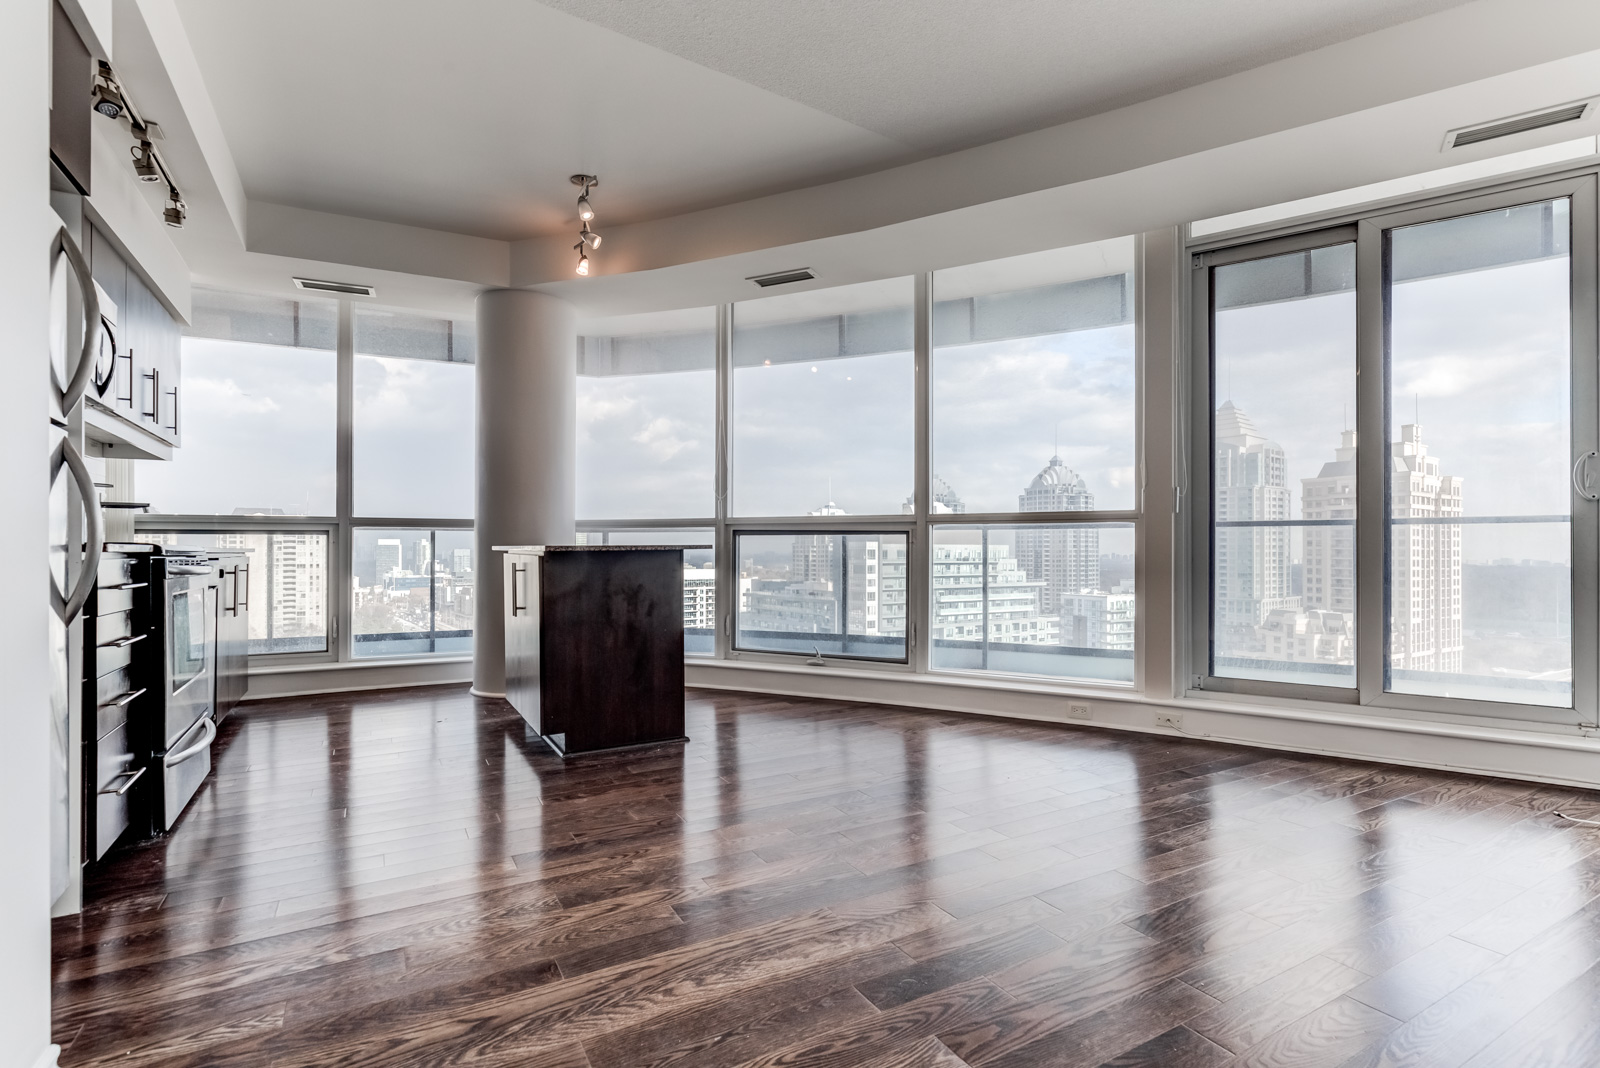 Unit 1106 and its huge floor-to-ceiling windows.